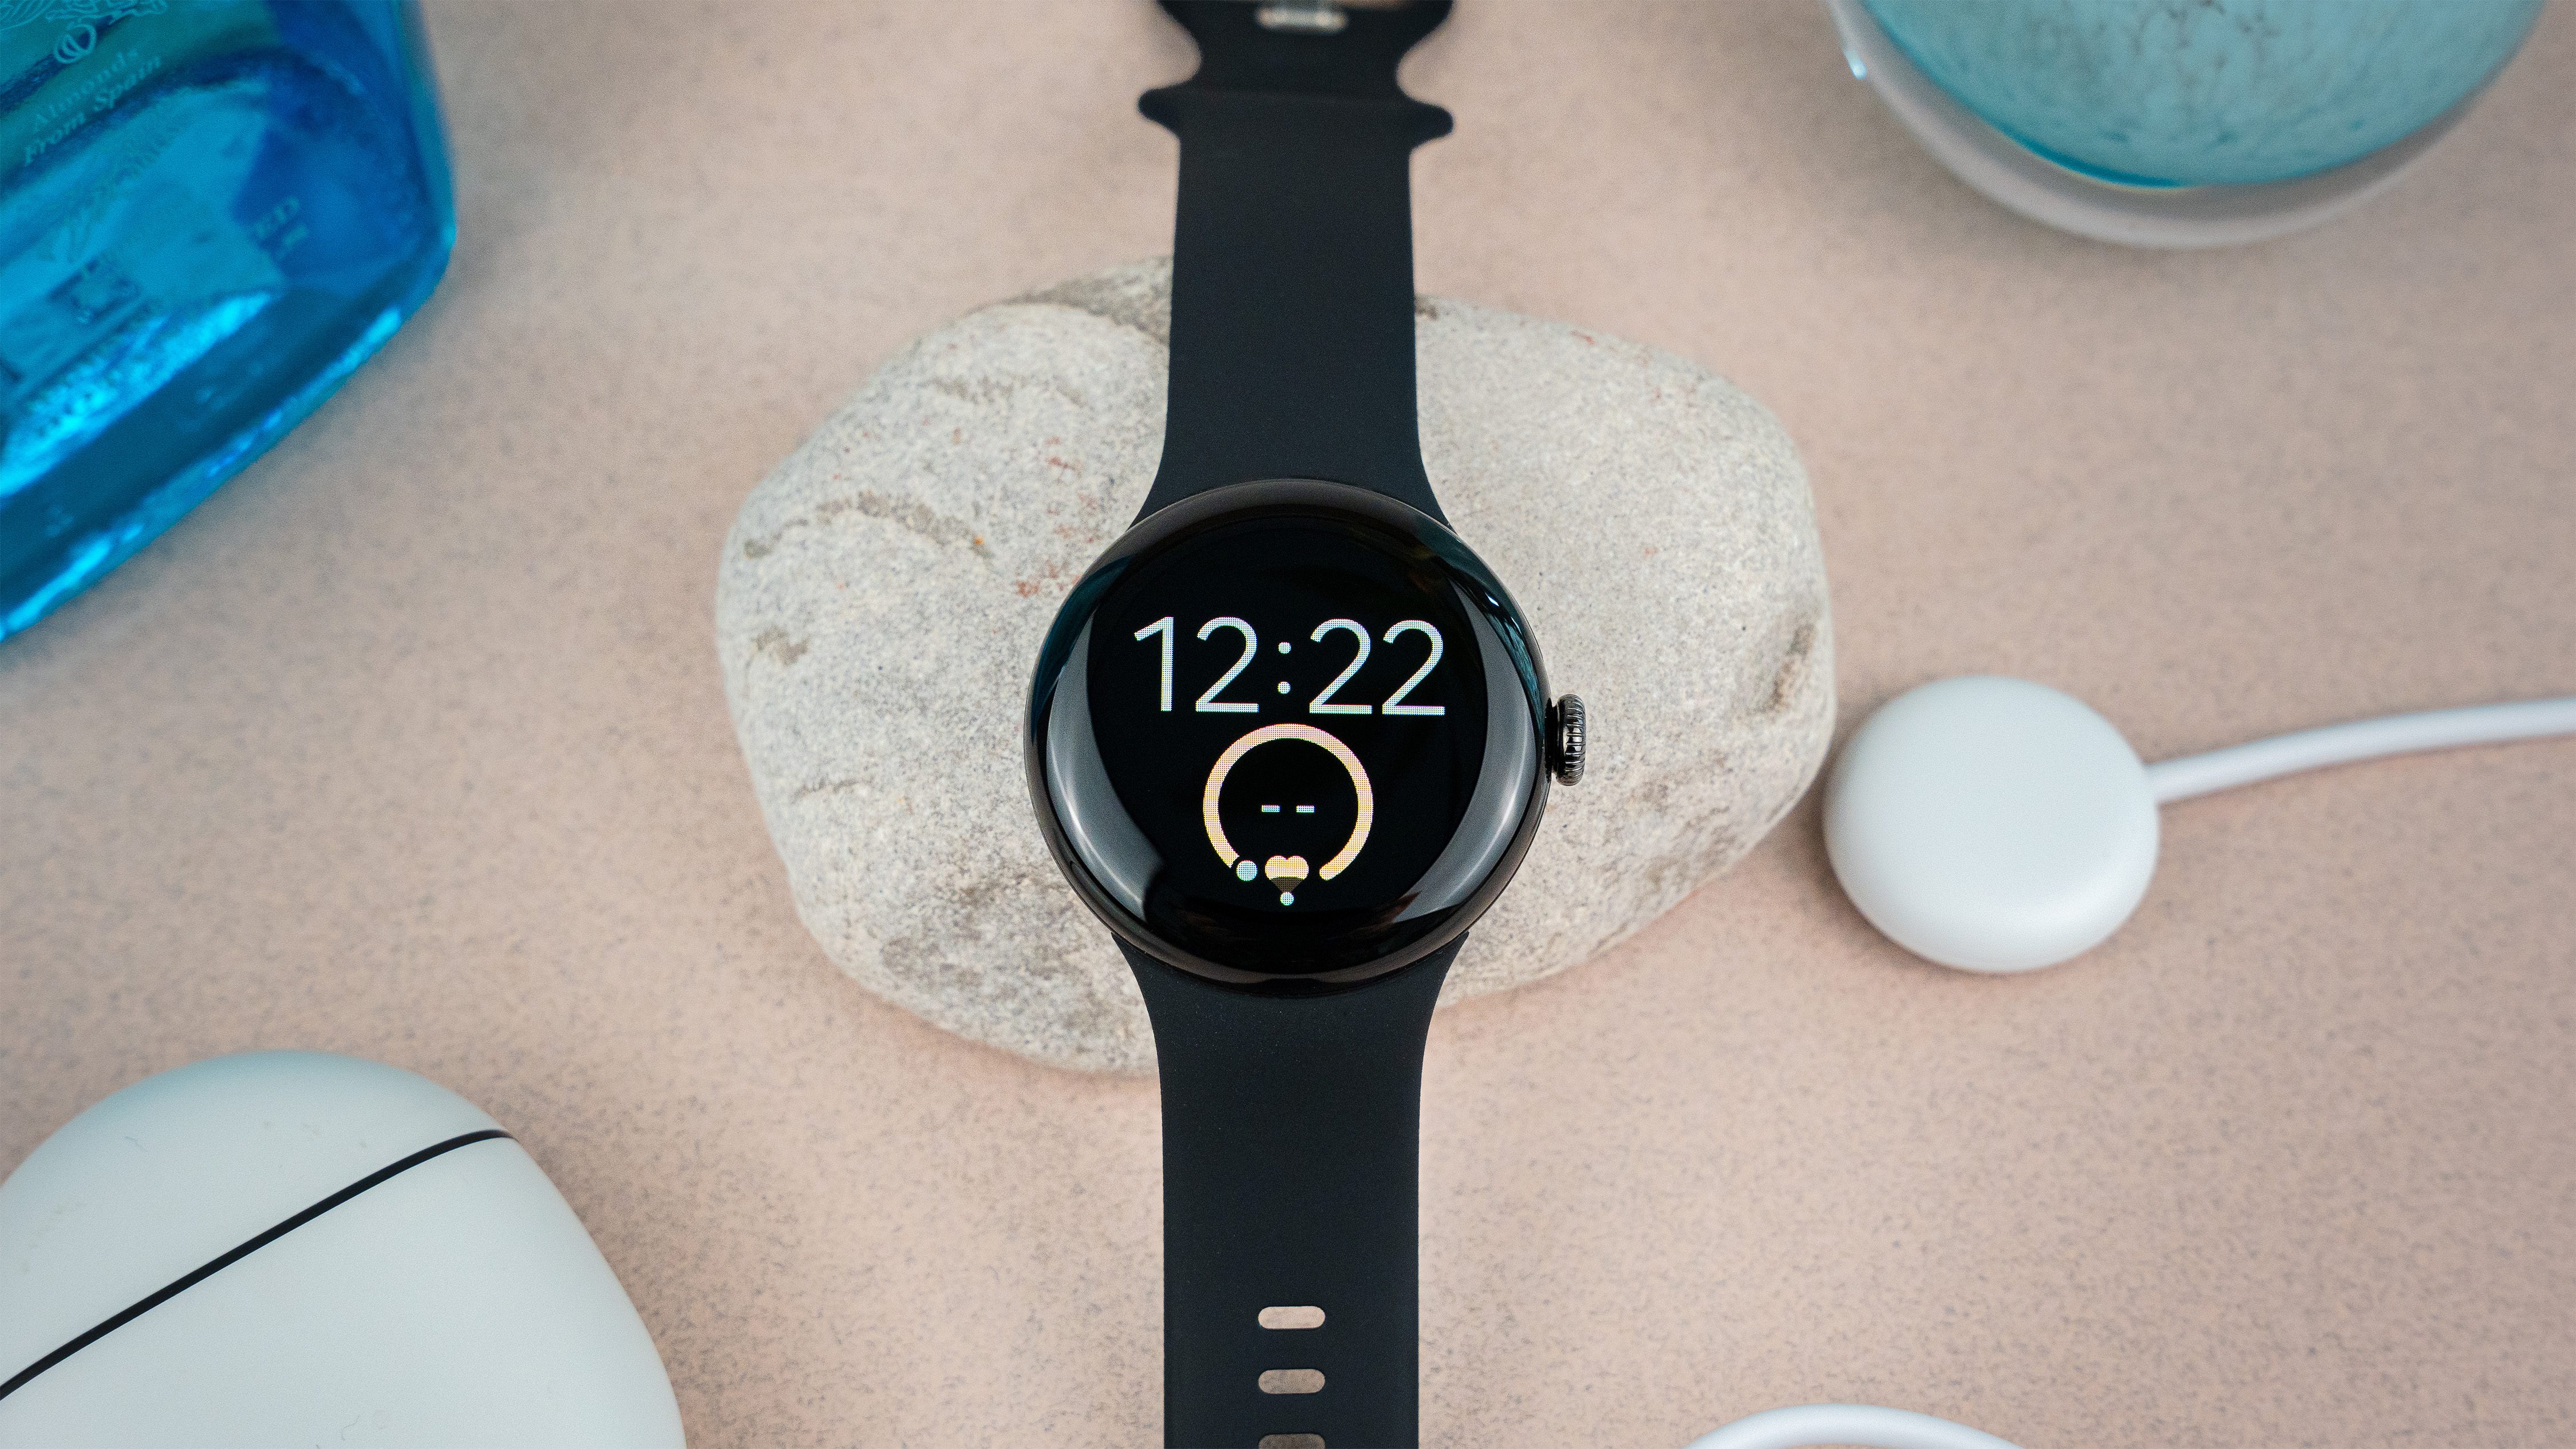 New Android features coming to phones and smartwatches